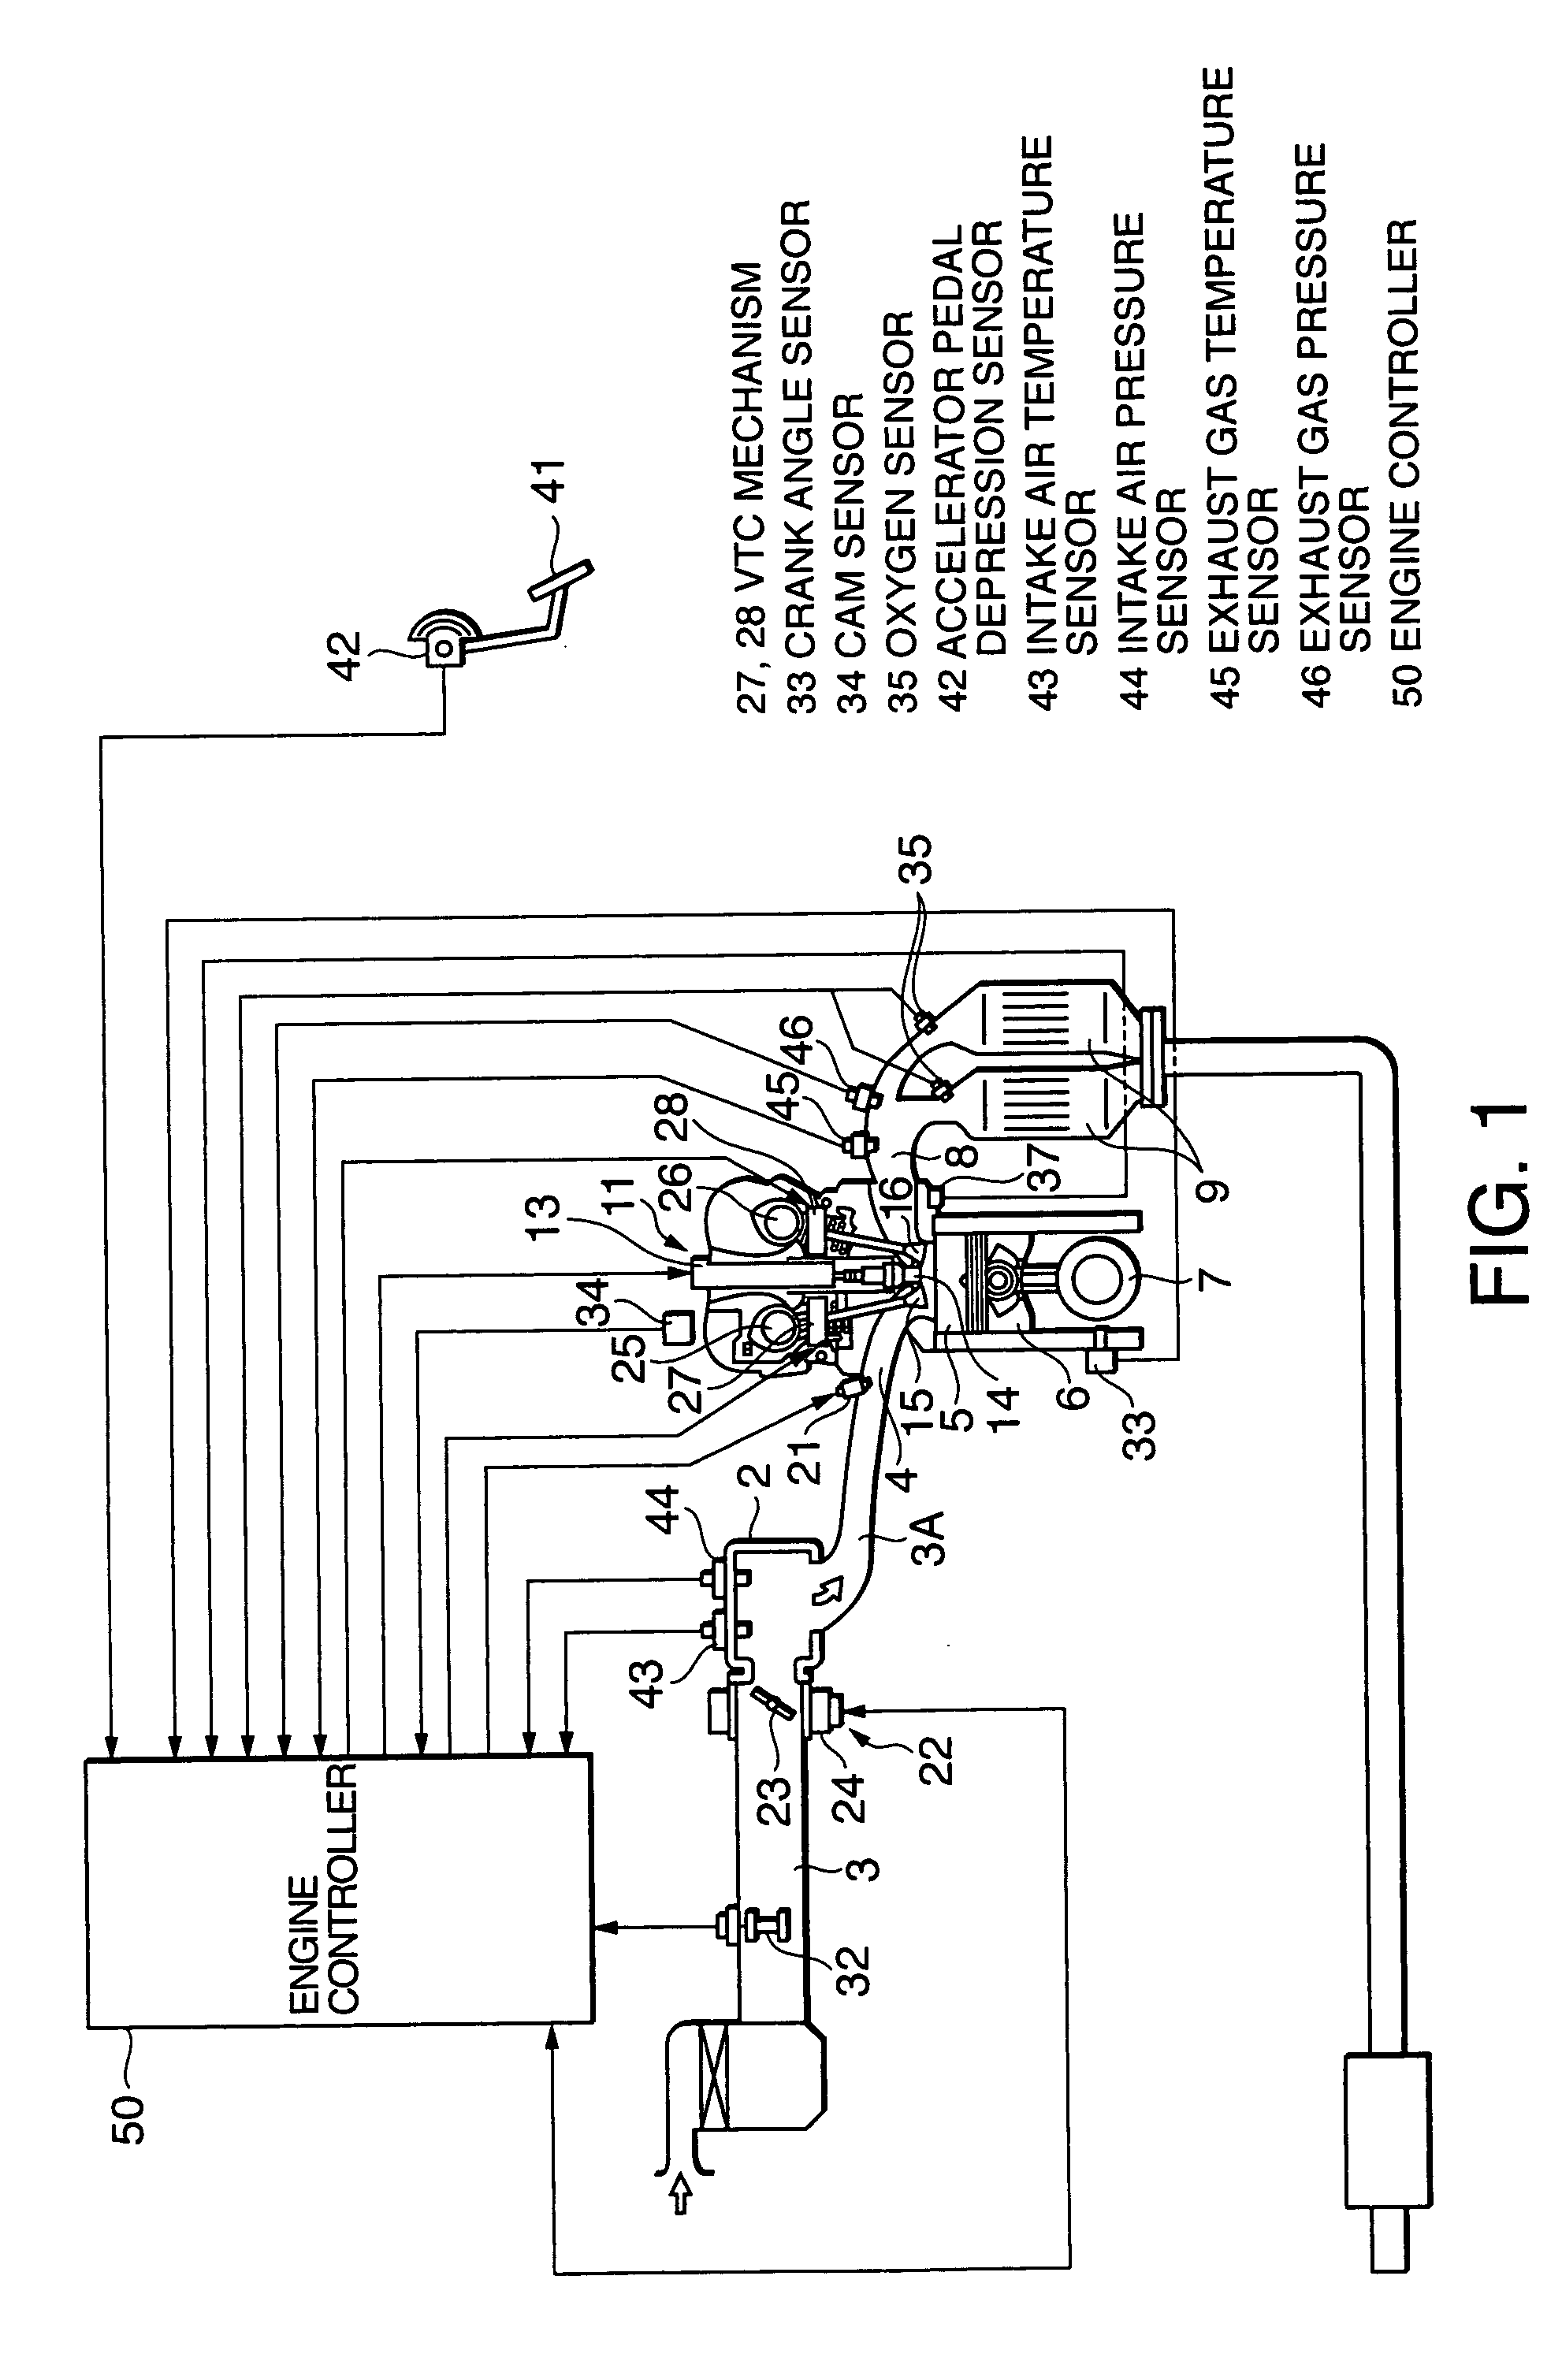 Ignition timing control for internal combustion engine